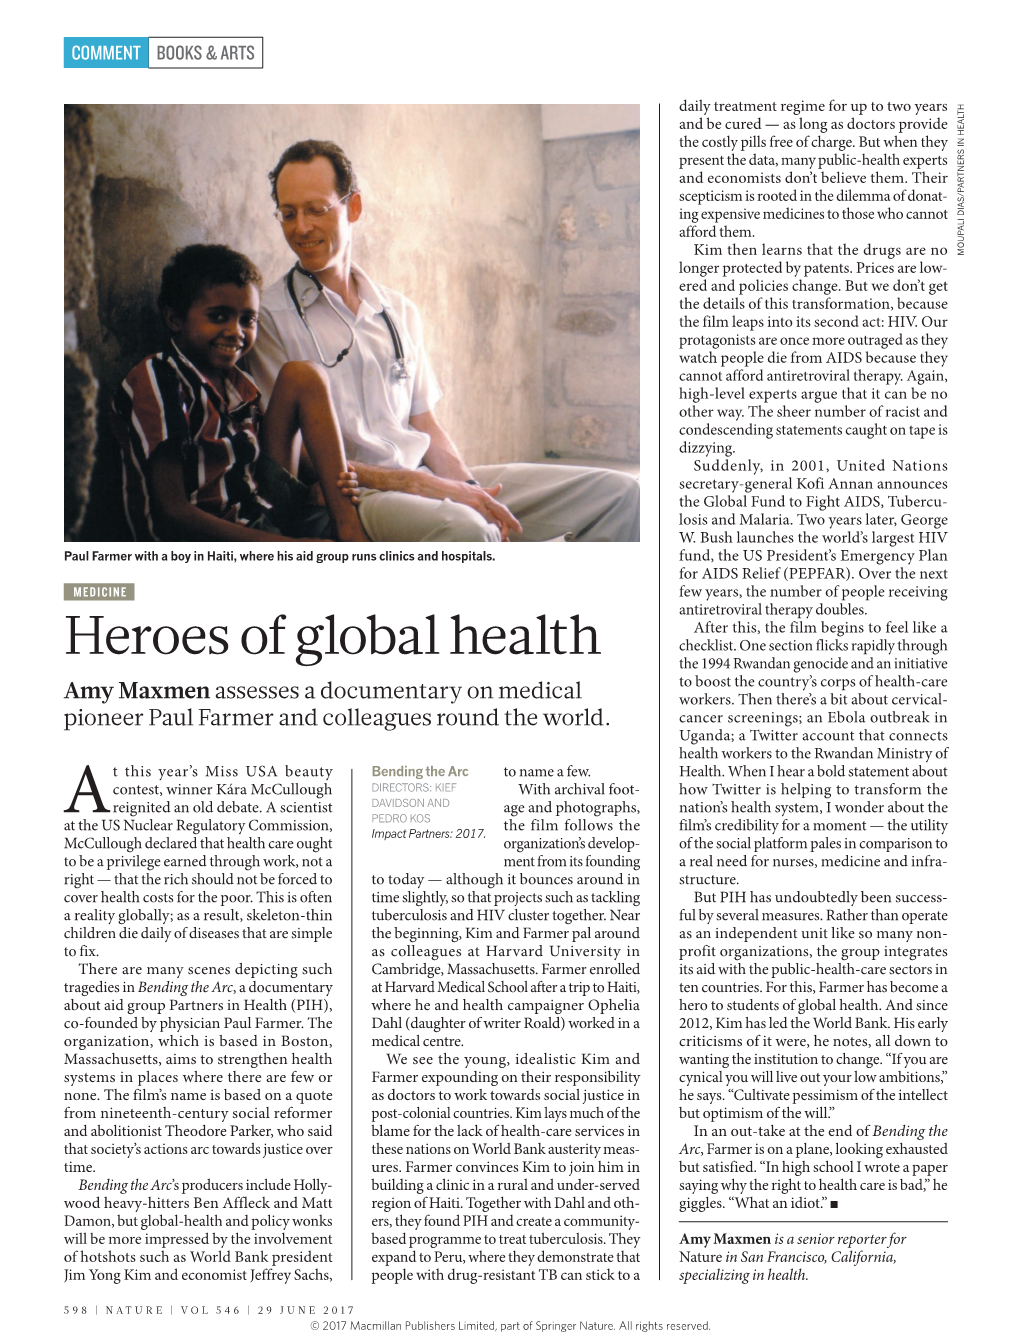 Heroes of Global Health the 1994 Rwandan Genocide and an Initiative to Boost the Country’S Corps of Health-Care Amy Maxmen Assesses a Documentary on Medical Workers